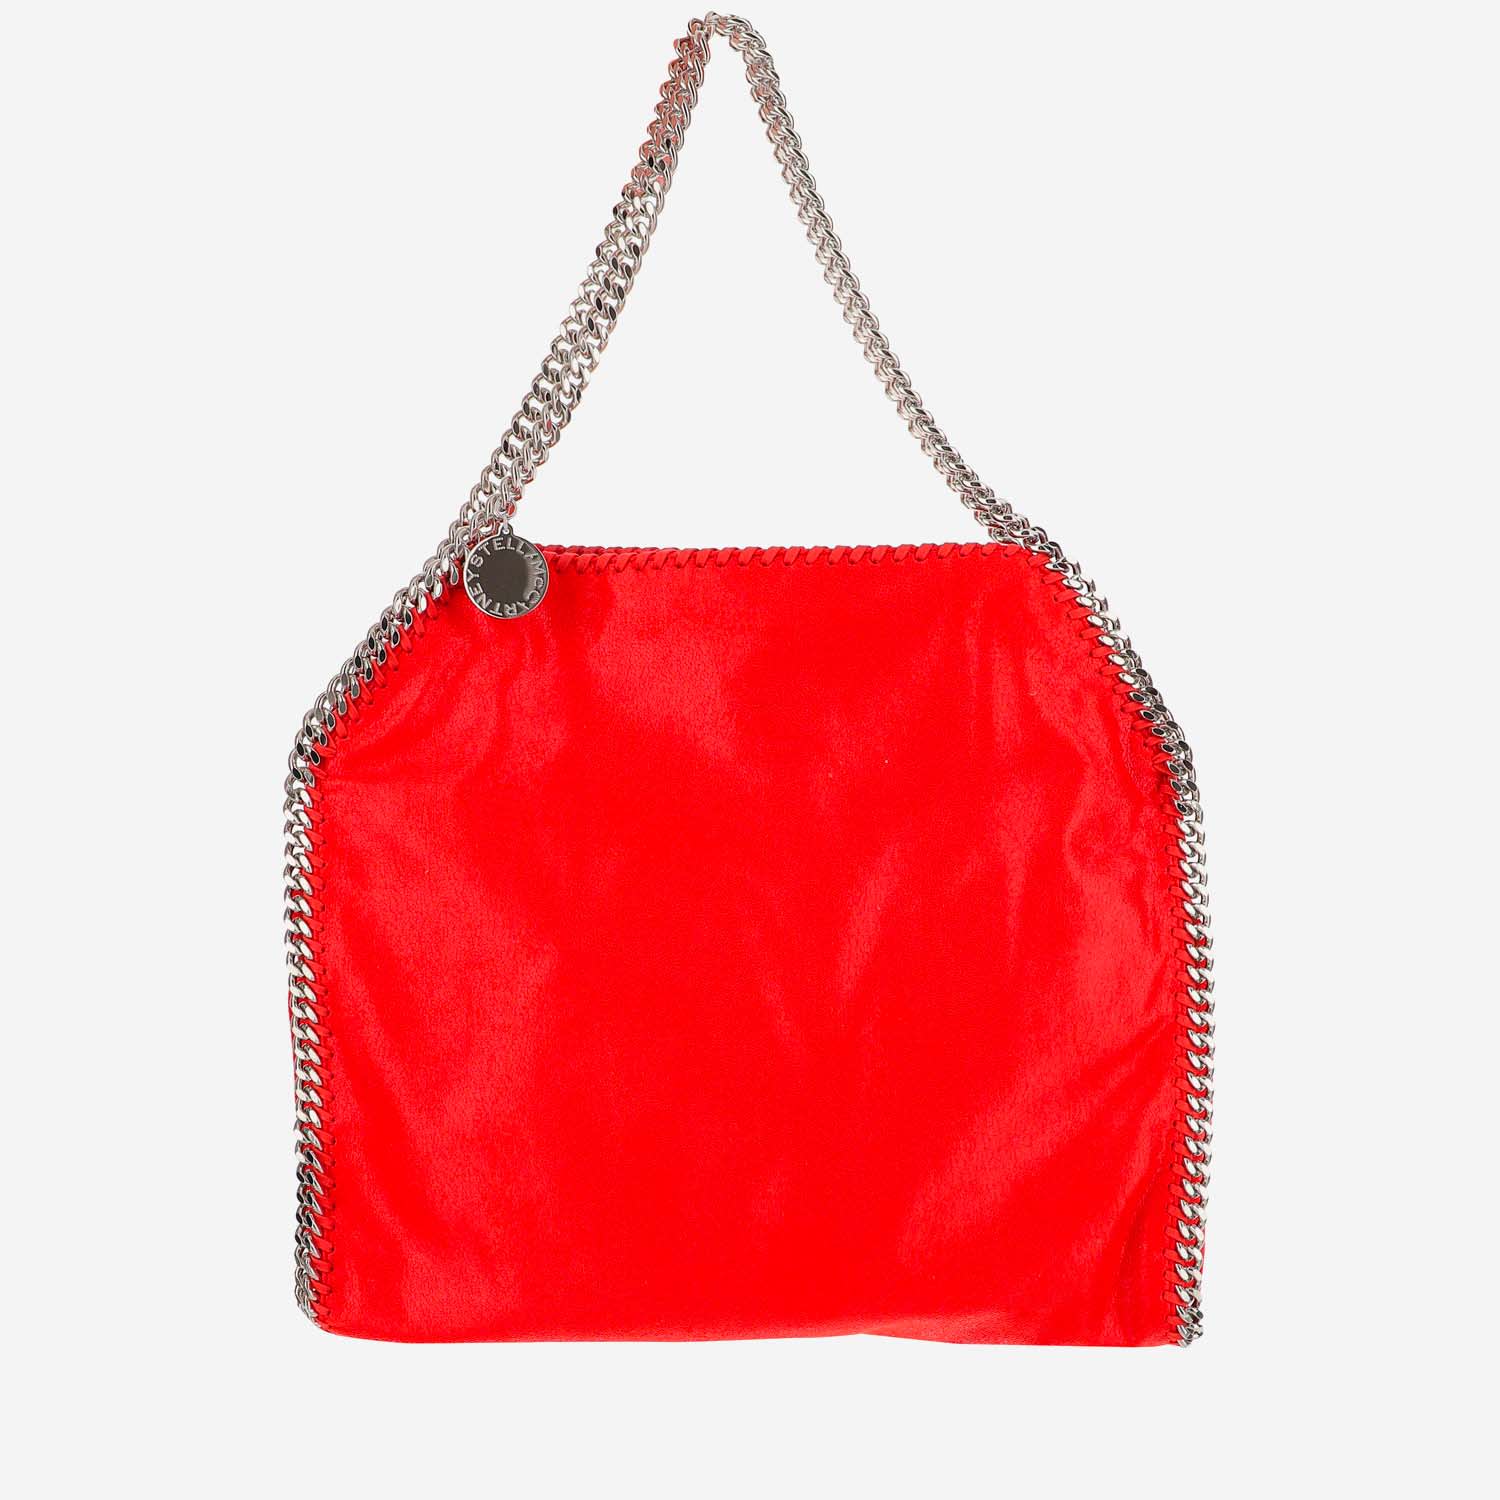 STELLA MCCARTNEY FALABELLA TOTE IN RED POLYESTER